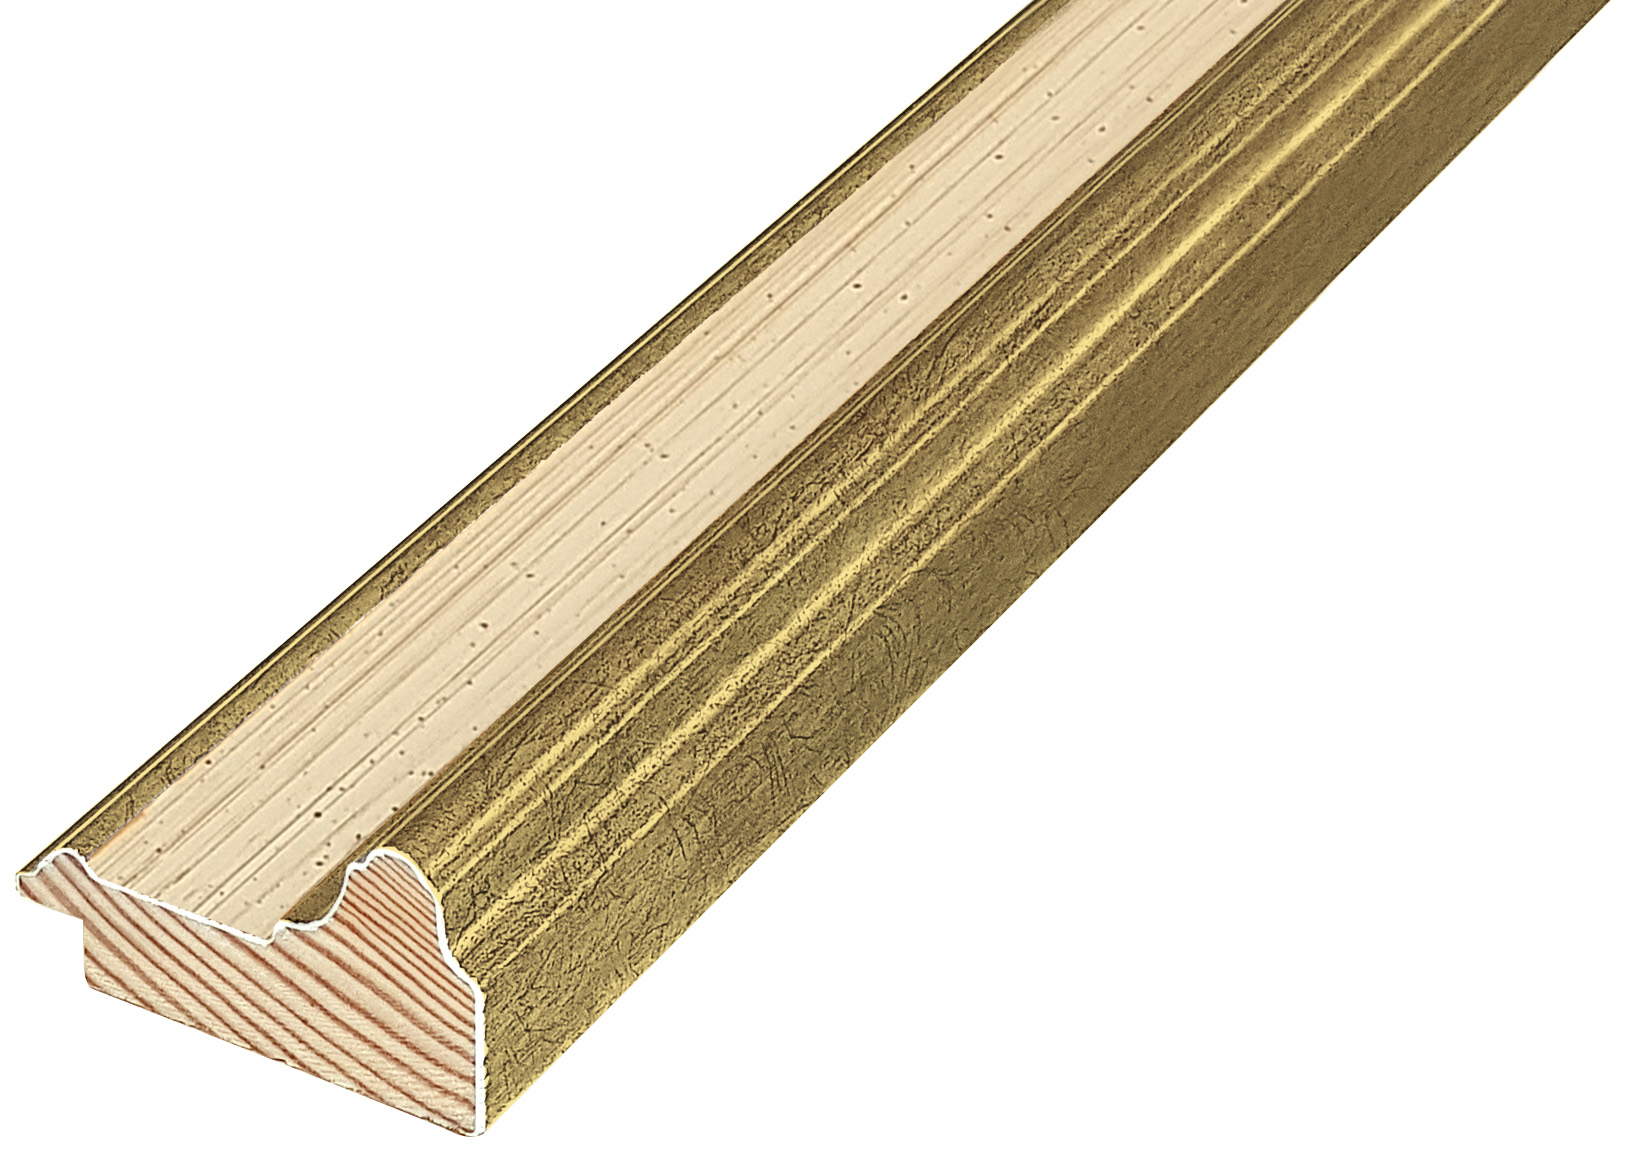 Moulding fingerjointed pine, widht 57mm, height 33mm - Cream